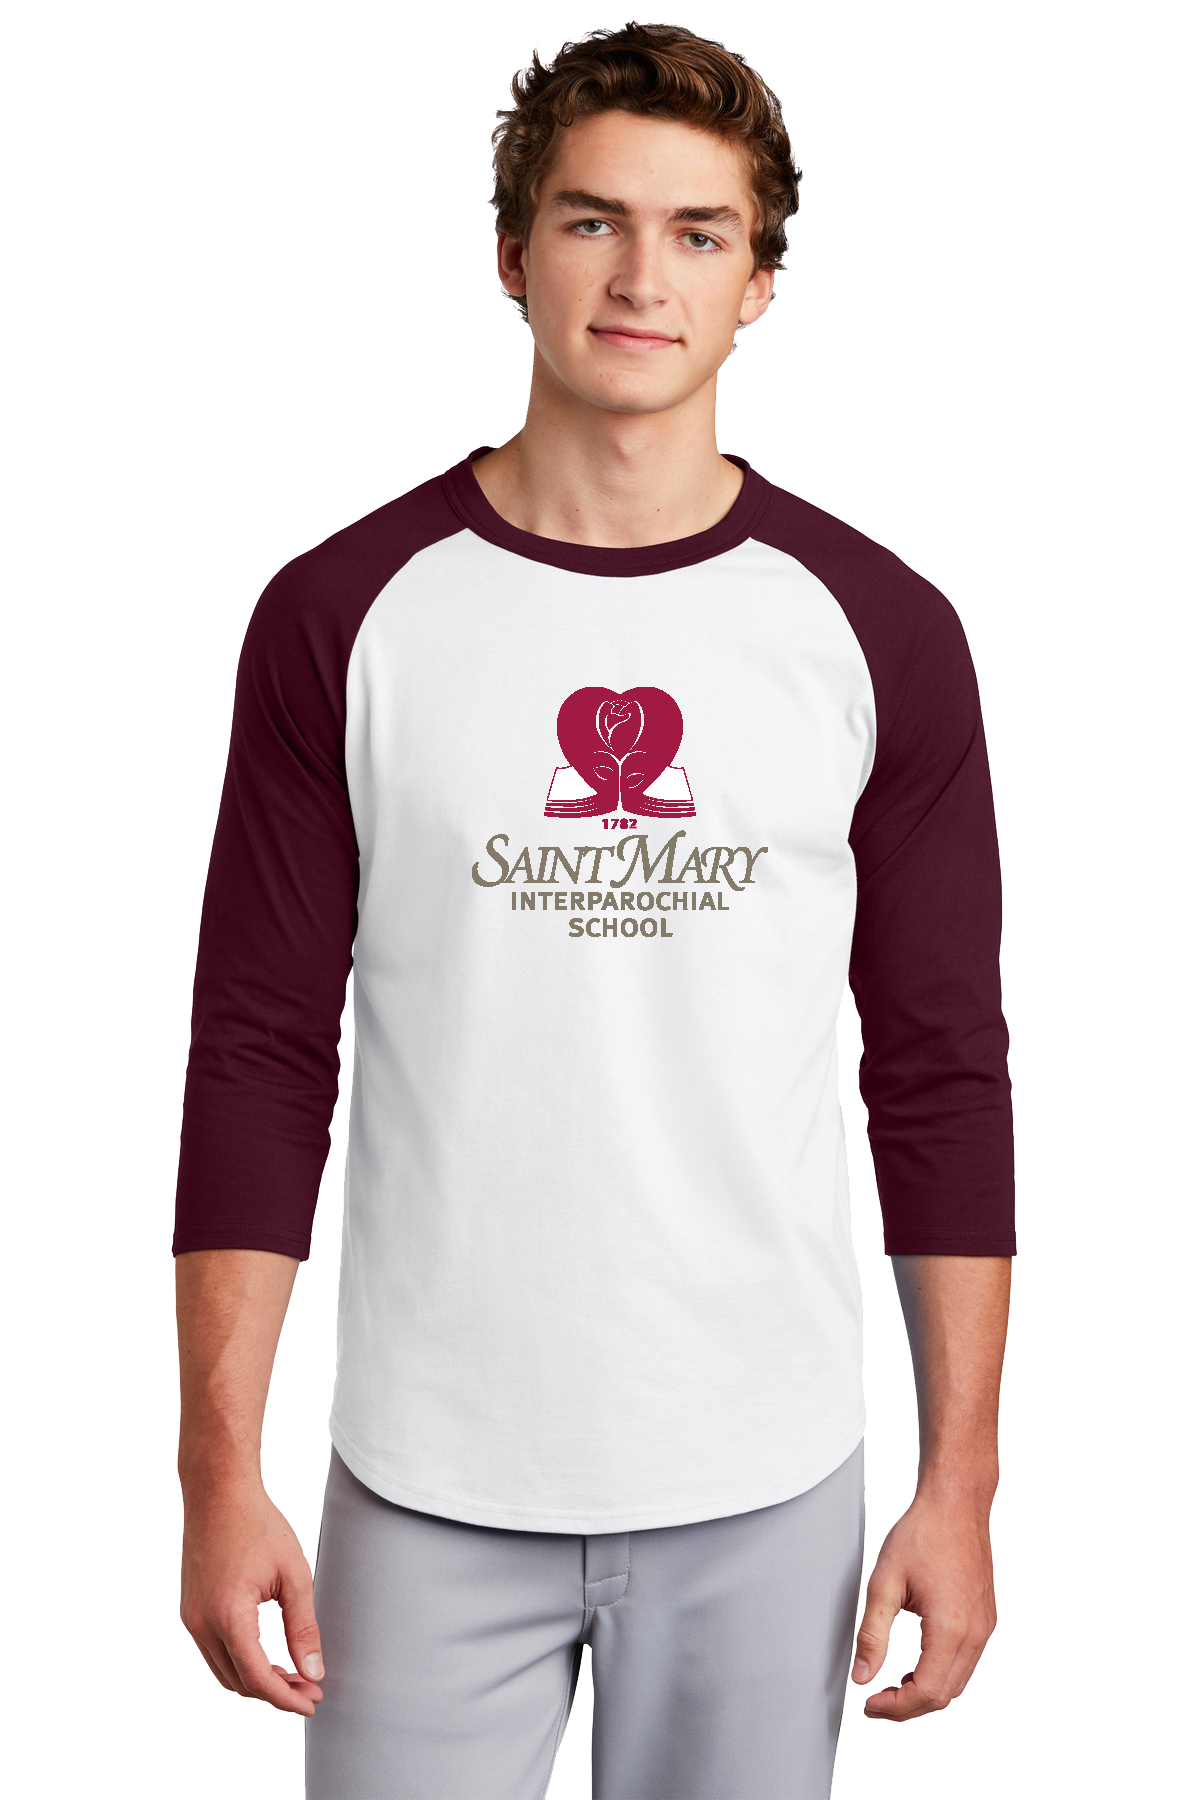 Saint Mary Colorblock Raglan Jersey -ADULT only